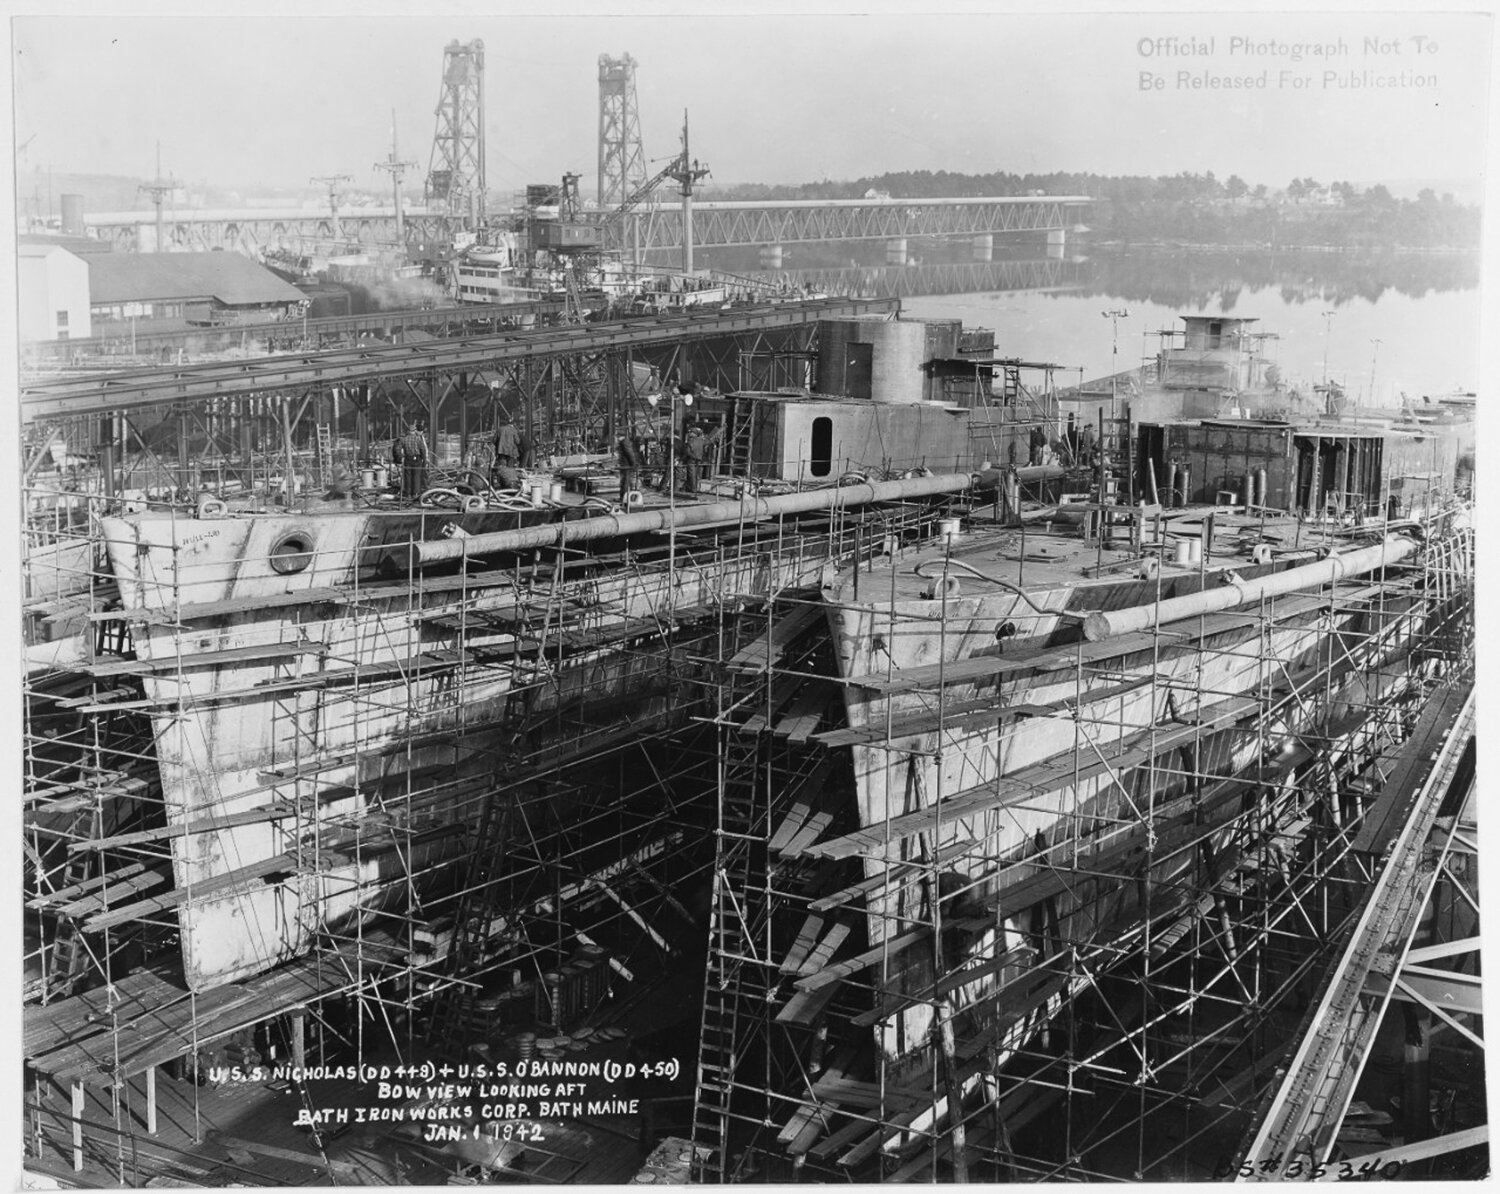 The U.S.S. Nicholas, left, and U.S.S. O'Bannon, right, are pictured under construction together at Bath Iron Works in Maine on Jan. 1, 1942. Photo courtesy the National Archives.